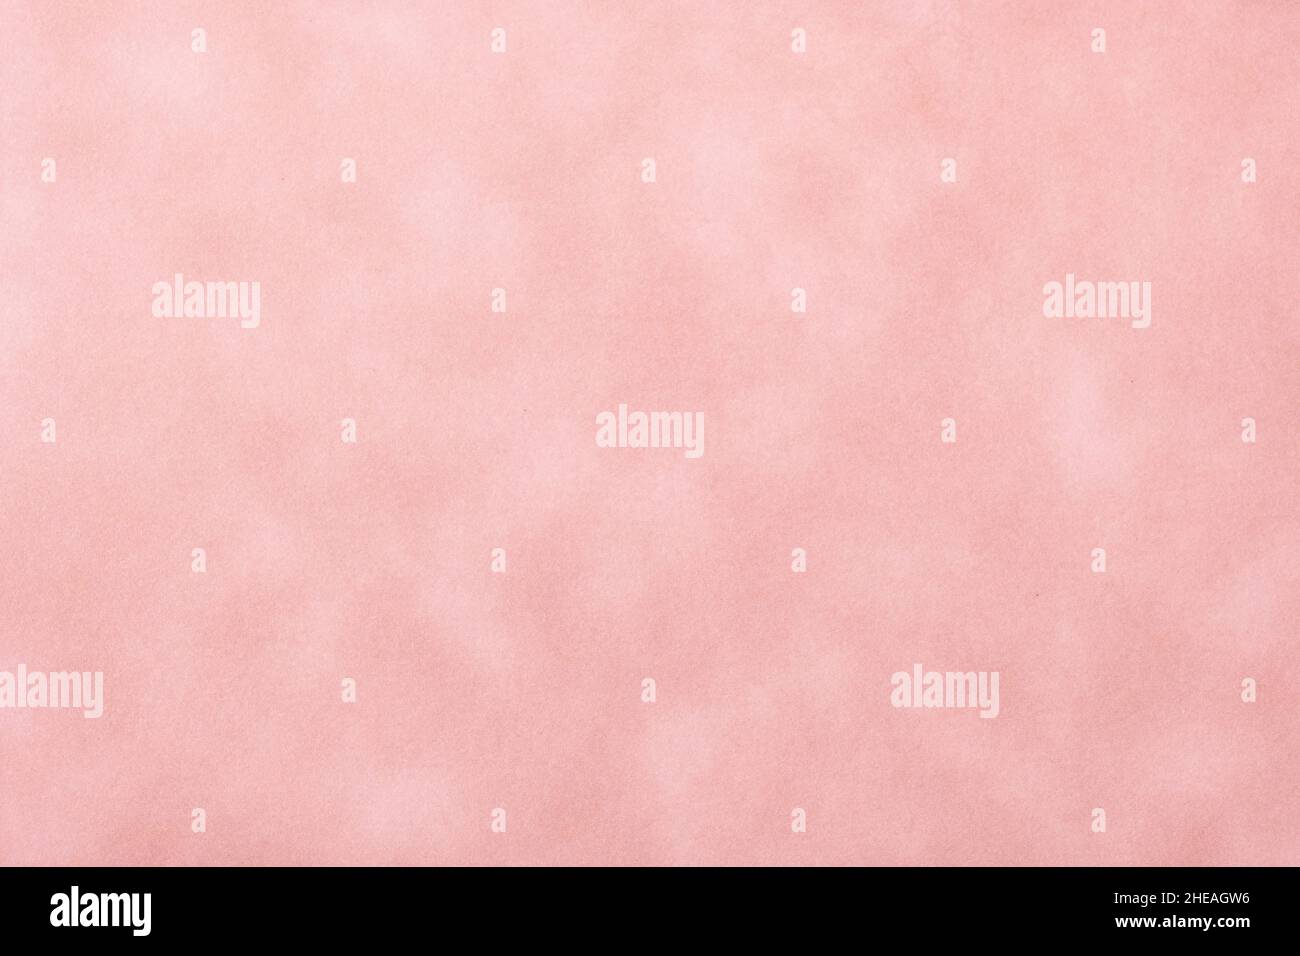 dirty brushed grunge background with pastel gray baby pink and medium  turquoise colors use it as wallpaper or graphic element for poster canvas  or Stock Photo  Alamy